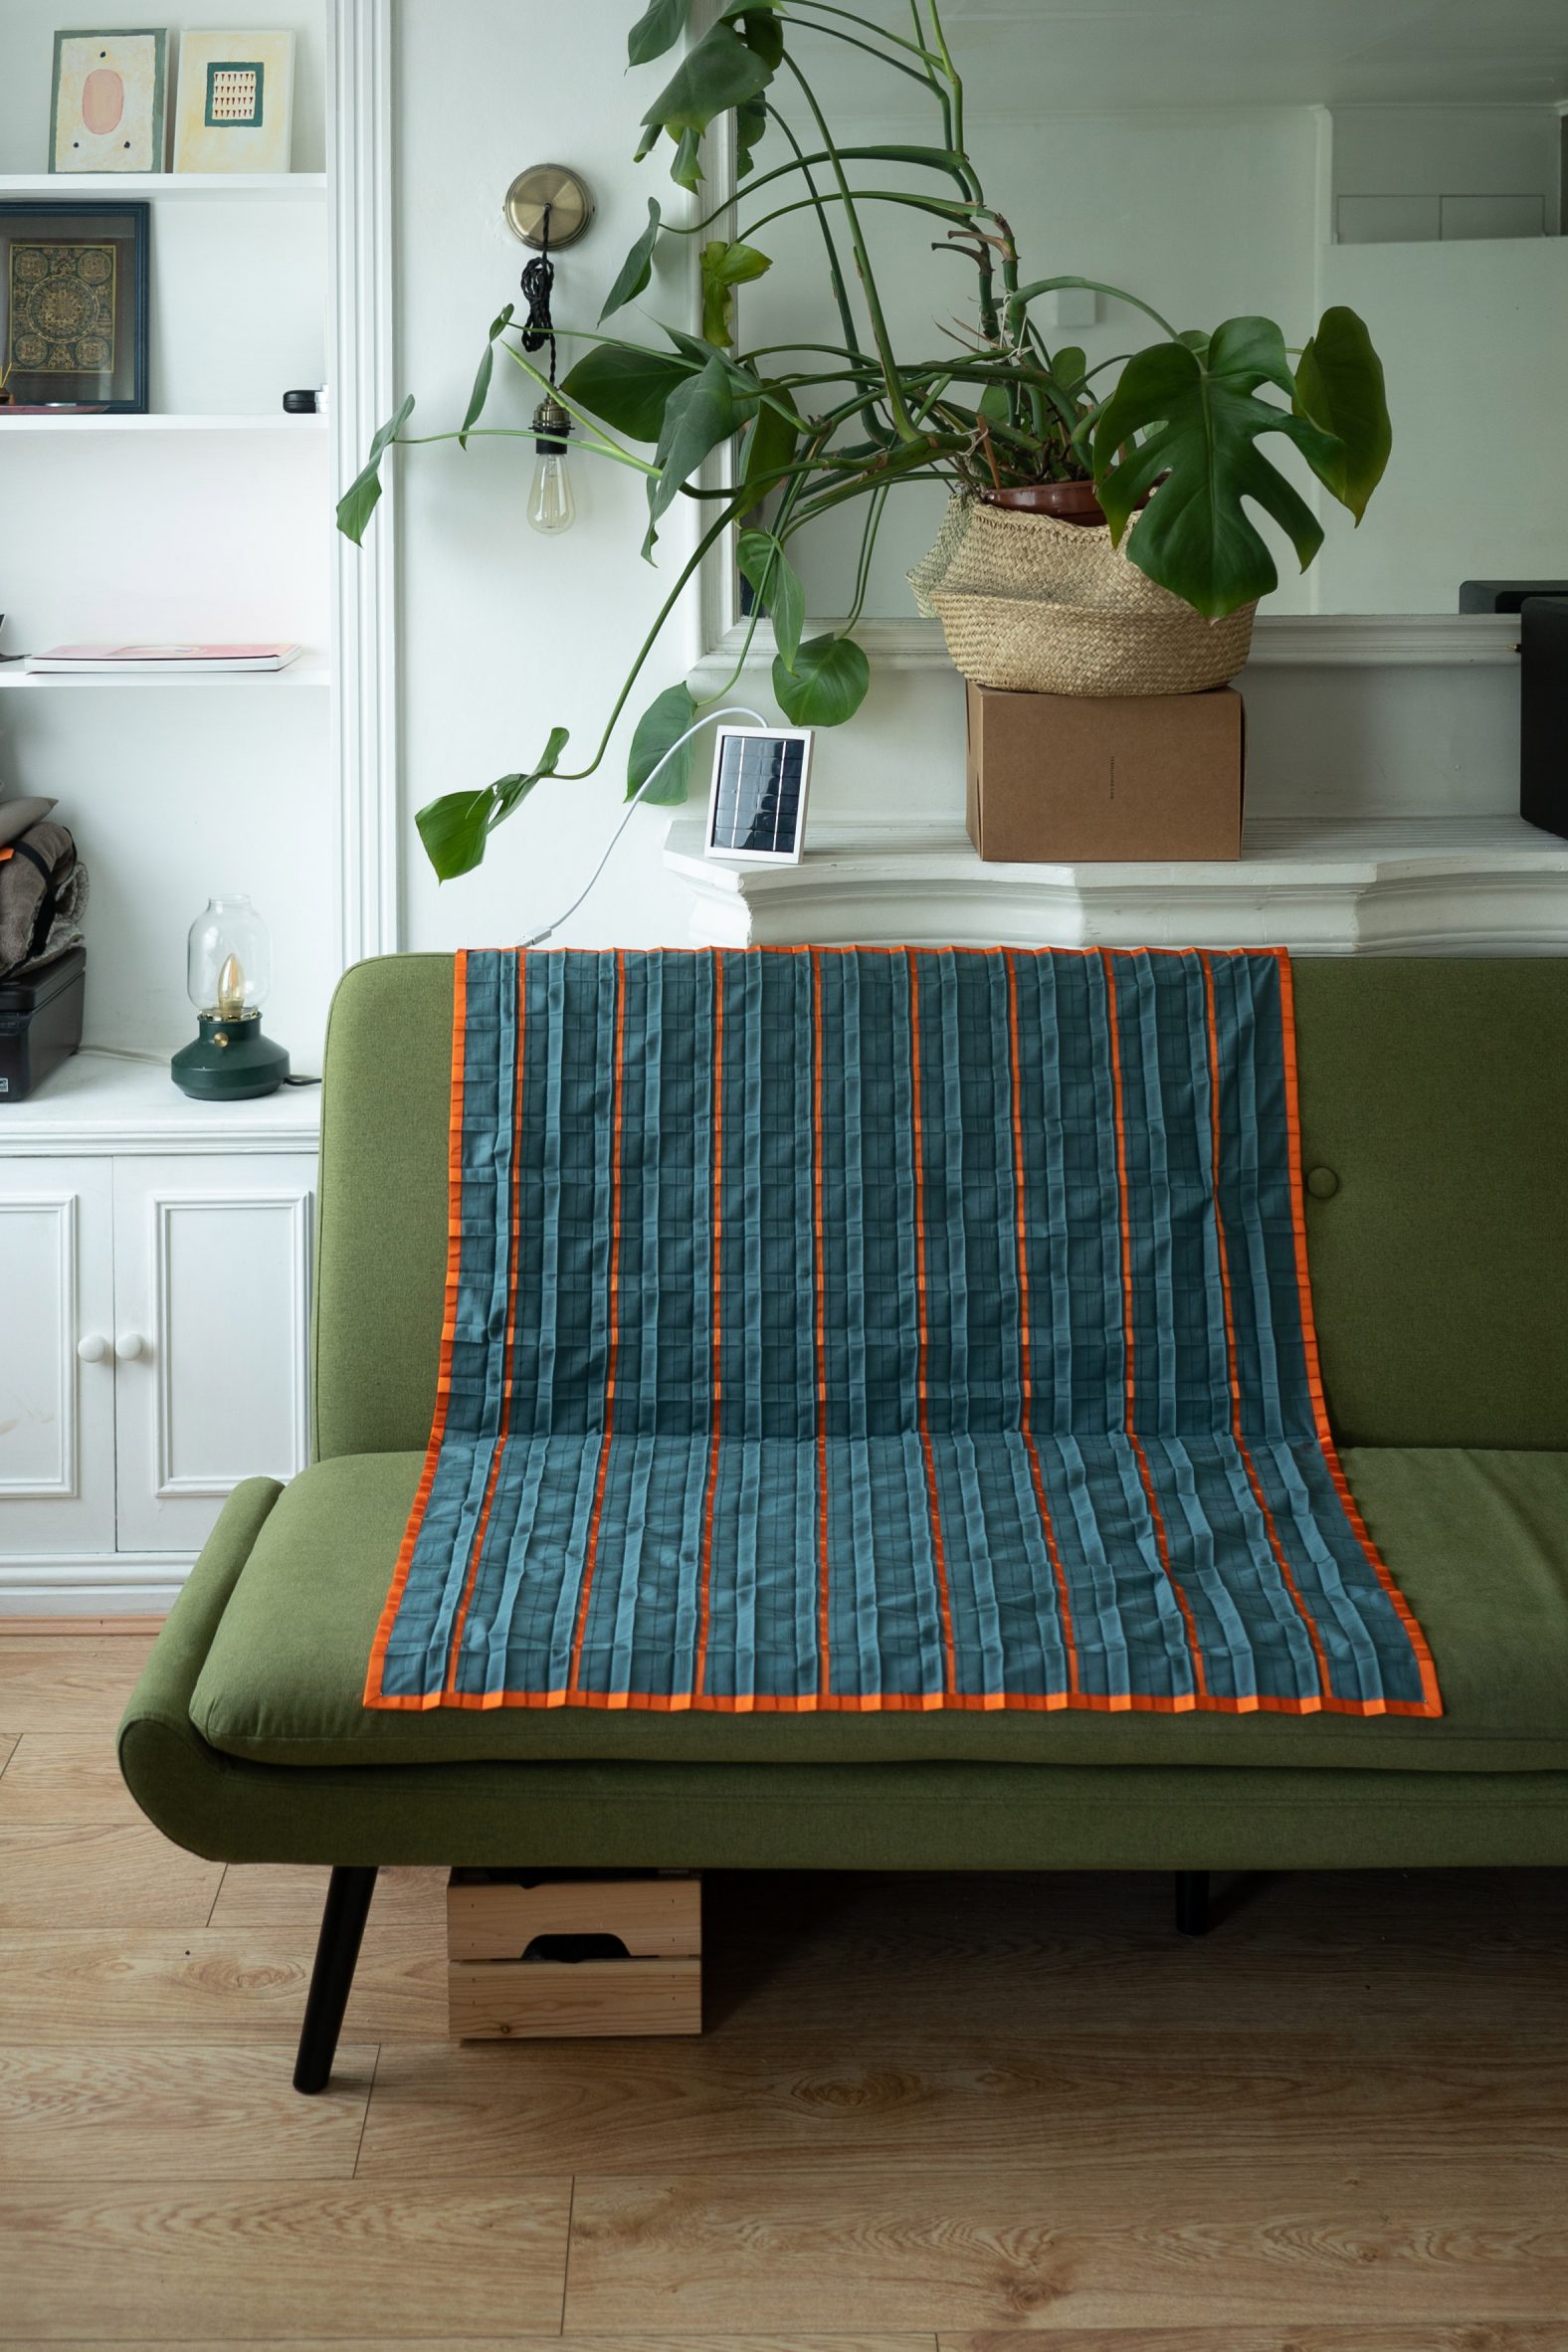 Photo of the Solar Blanket in blue spread on a sofa